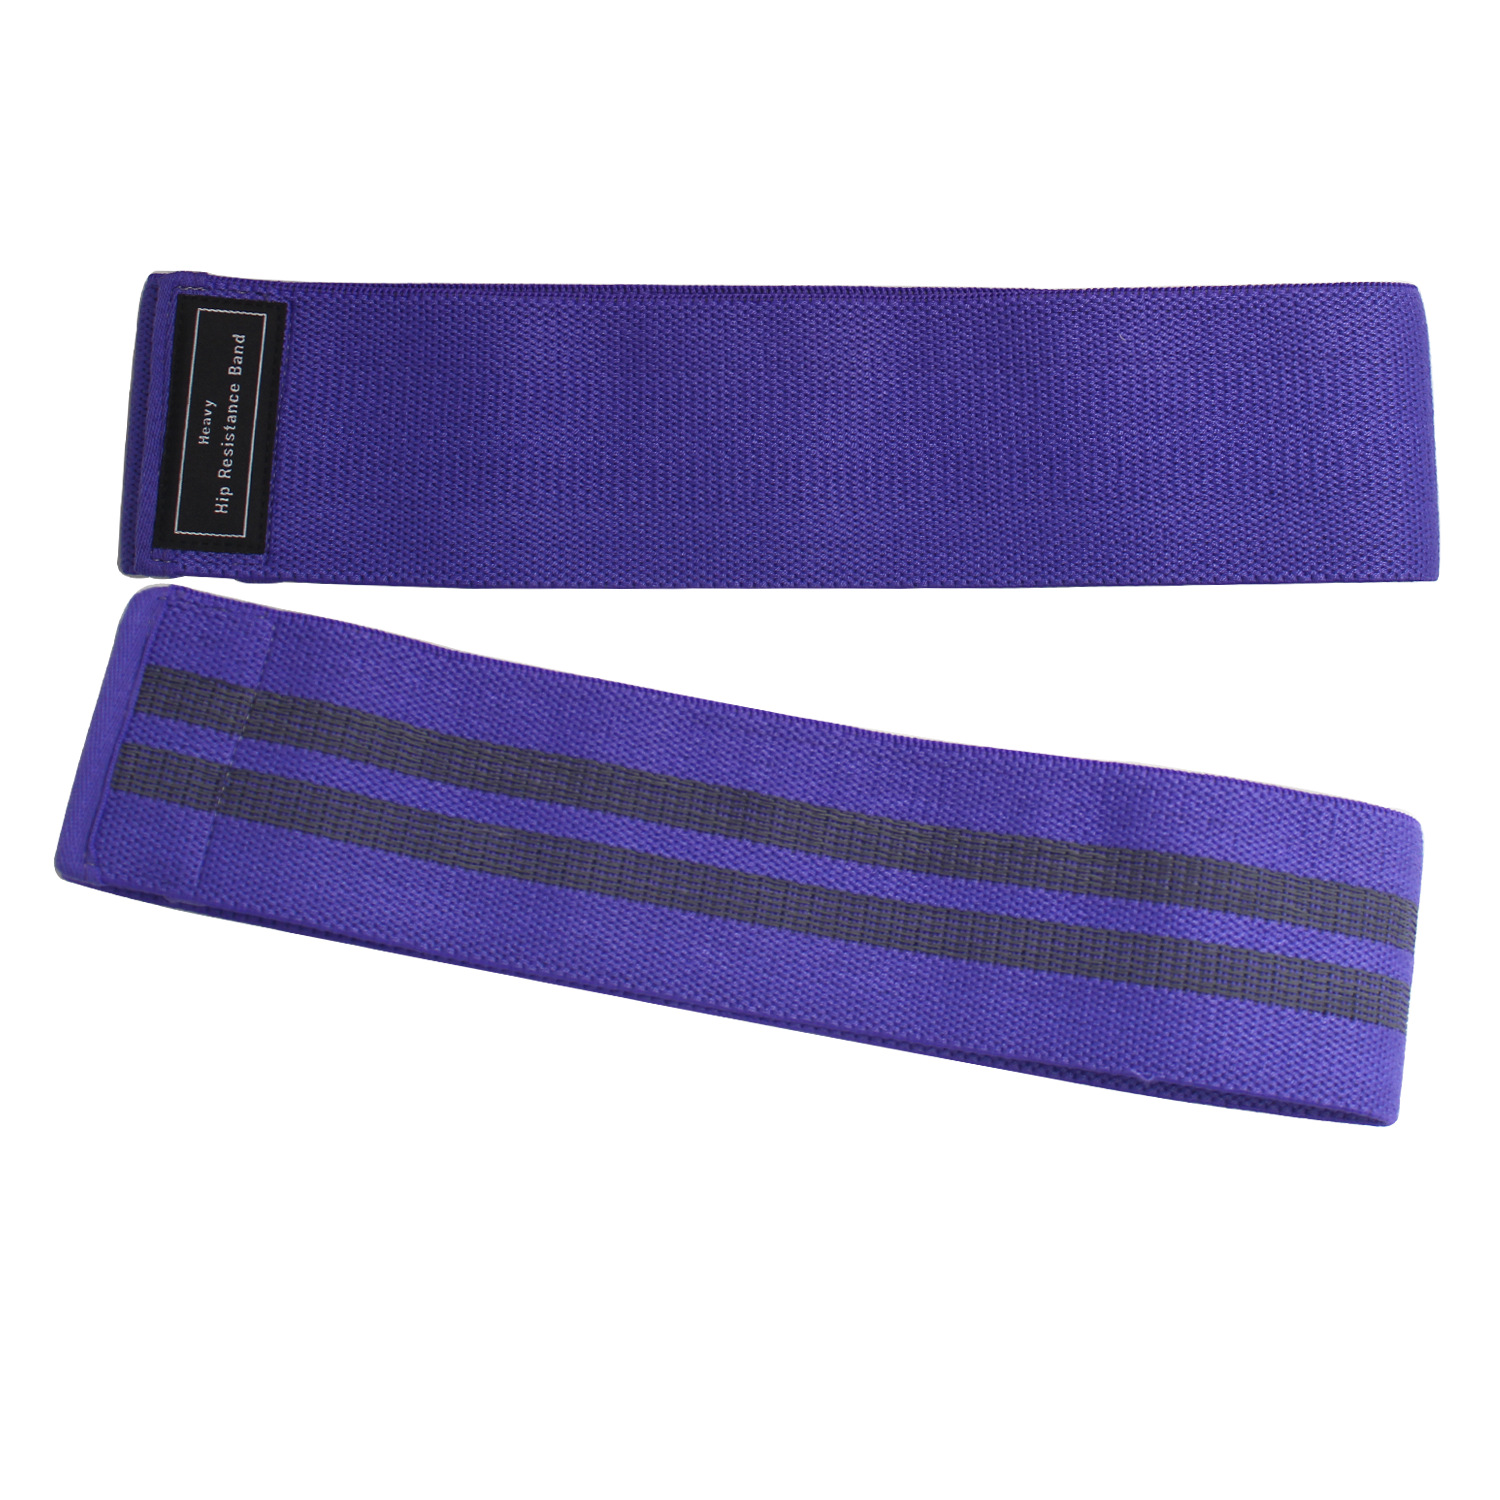 Non-slip Cloth Exercise Resistance Bands to Workout Glutes, Thighs & Legs Band Training for Gym & Home Fitness